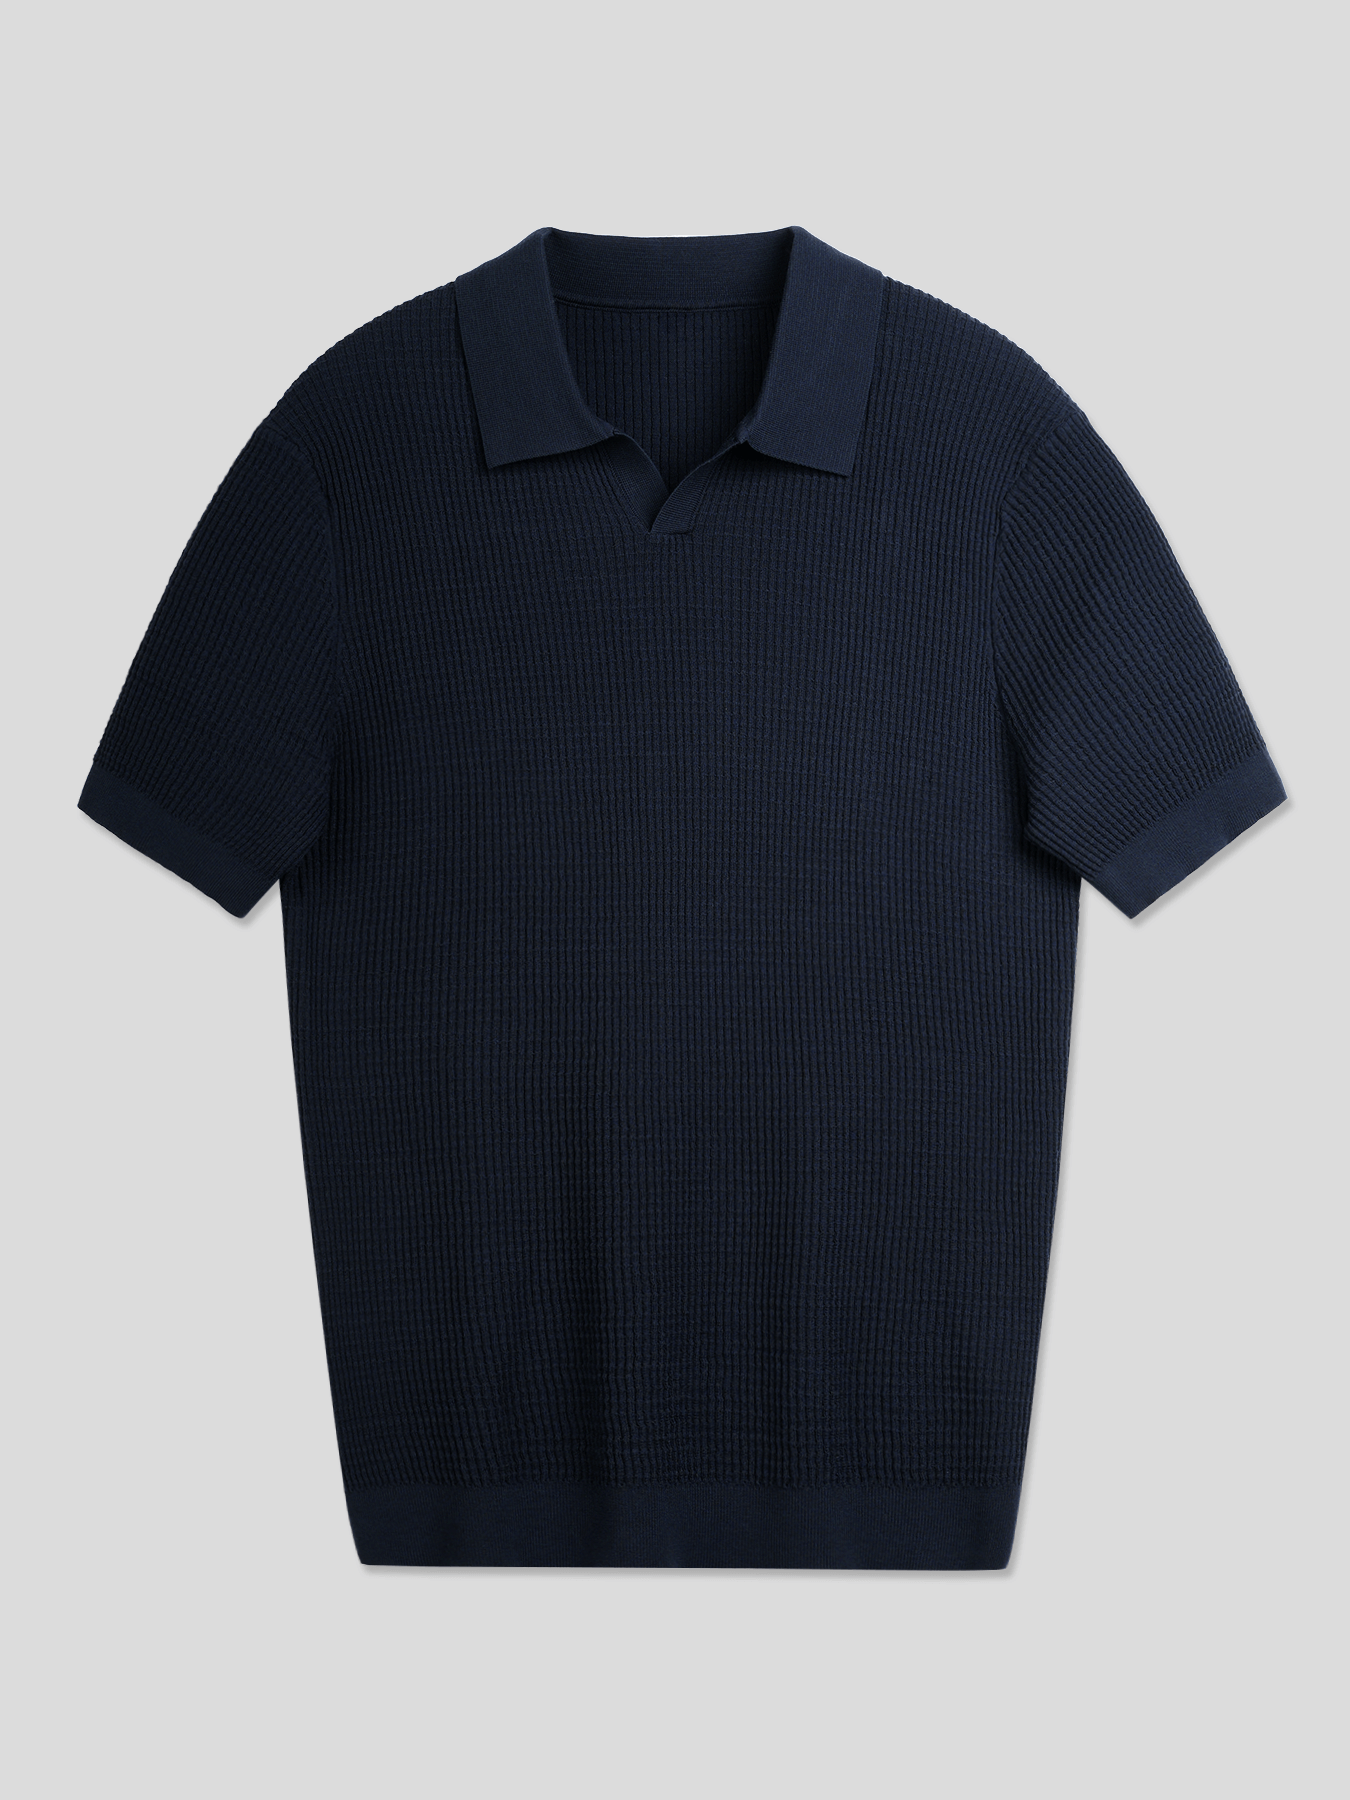 FlexKnit Active Knitted Buttonless Polo